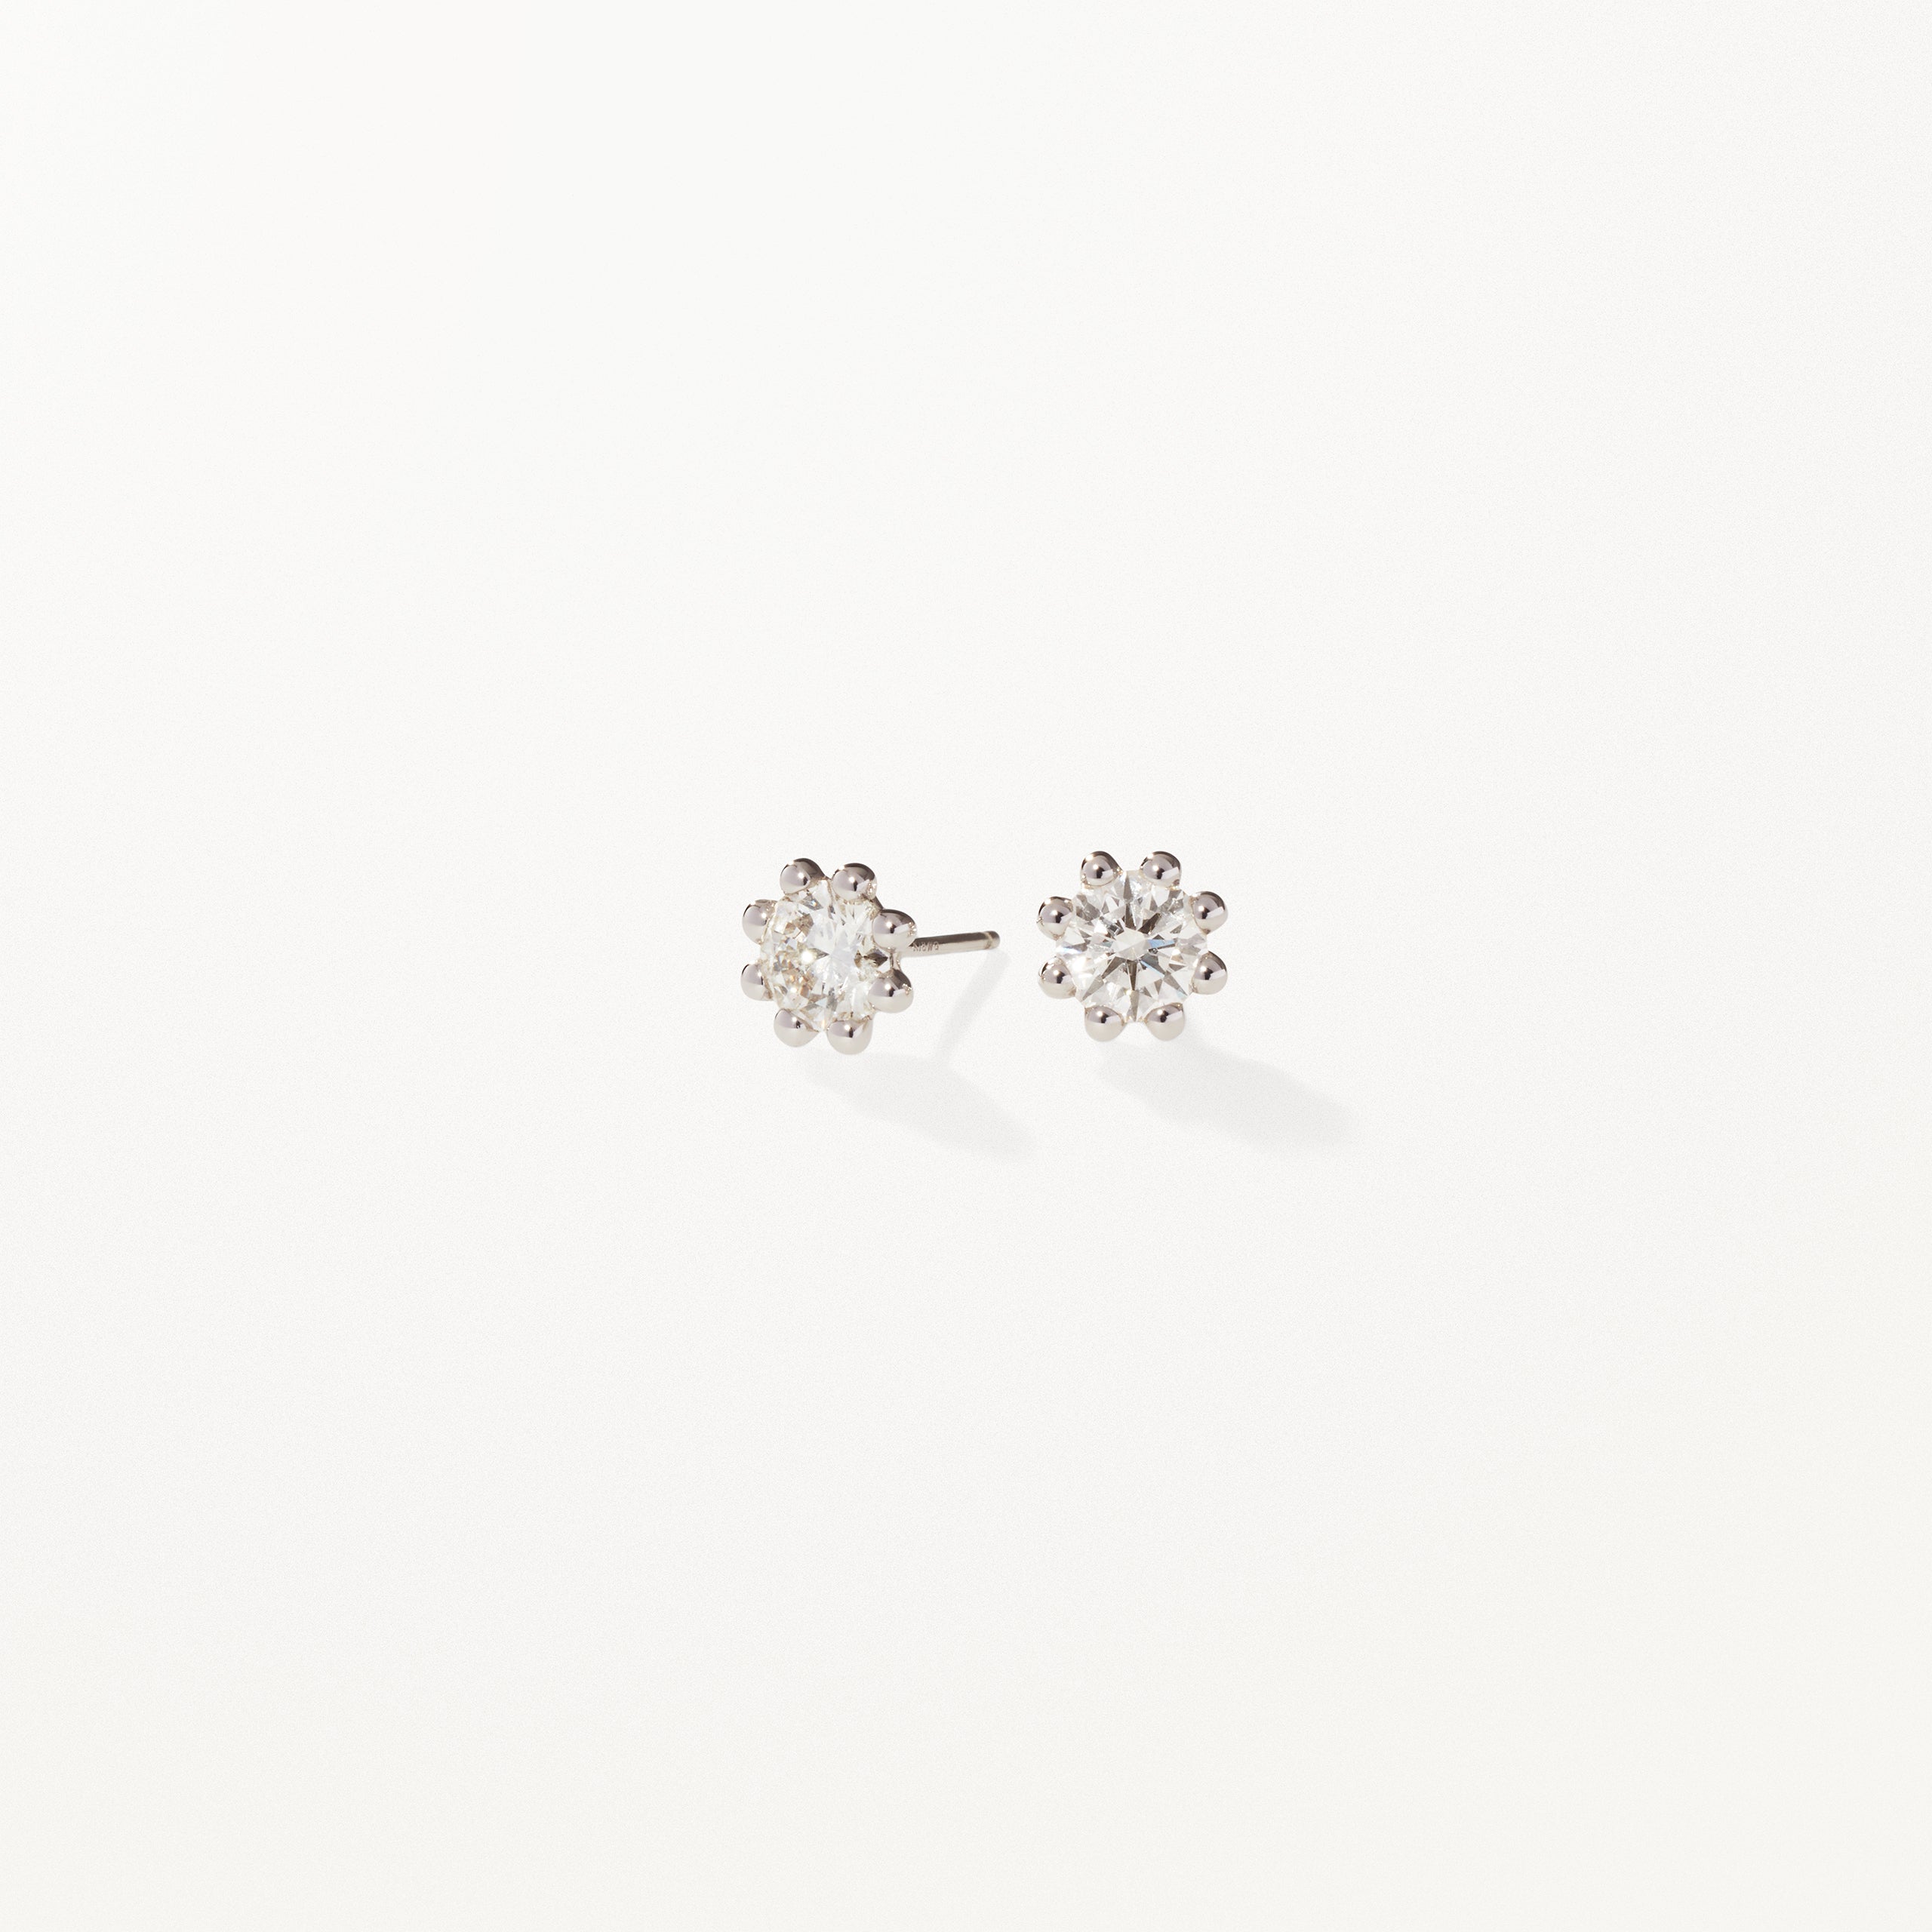 Colorless Certified Round Diamond Stud Earring in 18K White Gold, 0.30-2.0  ct. t.w. - 100% Exclusive